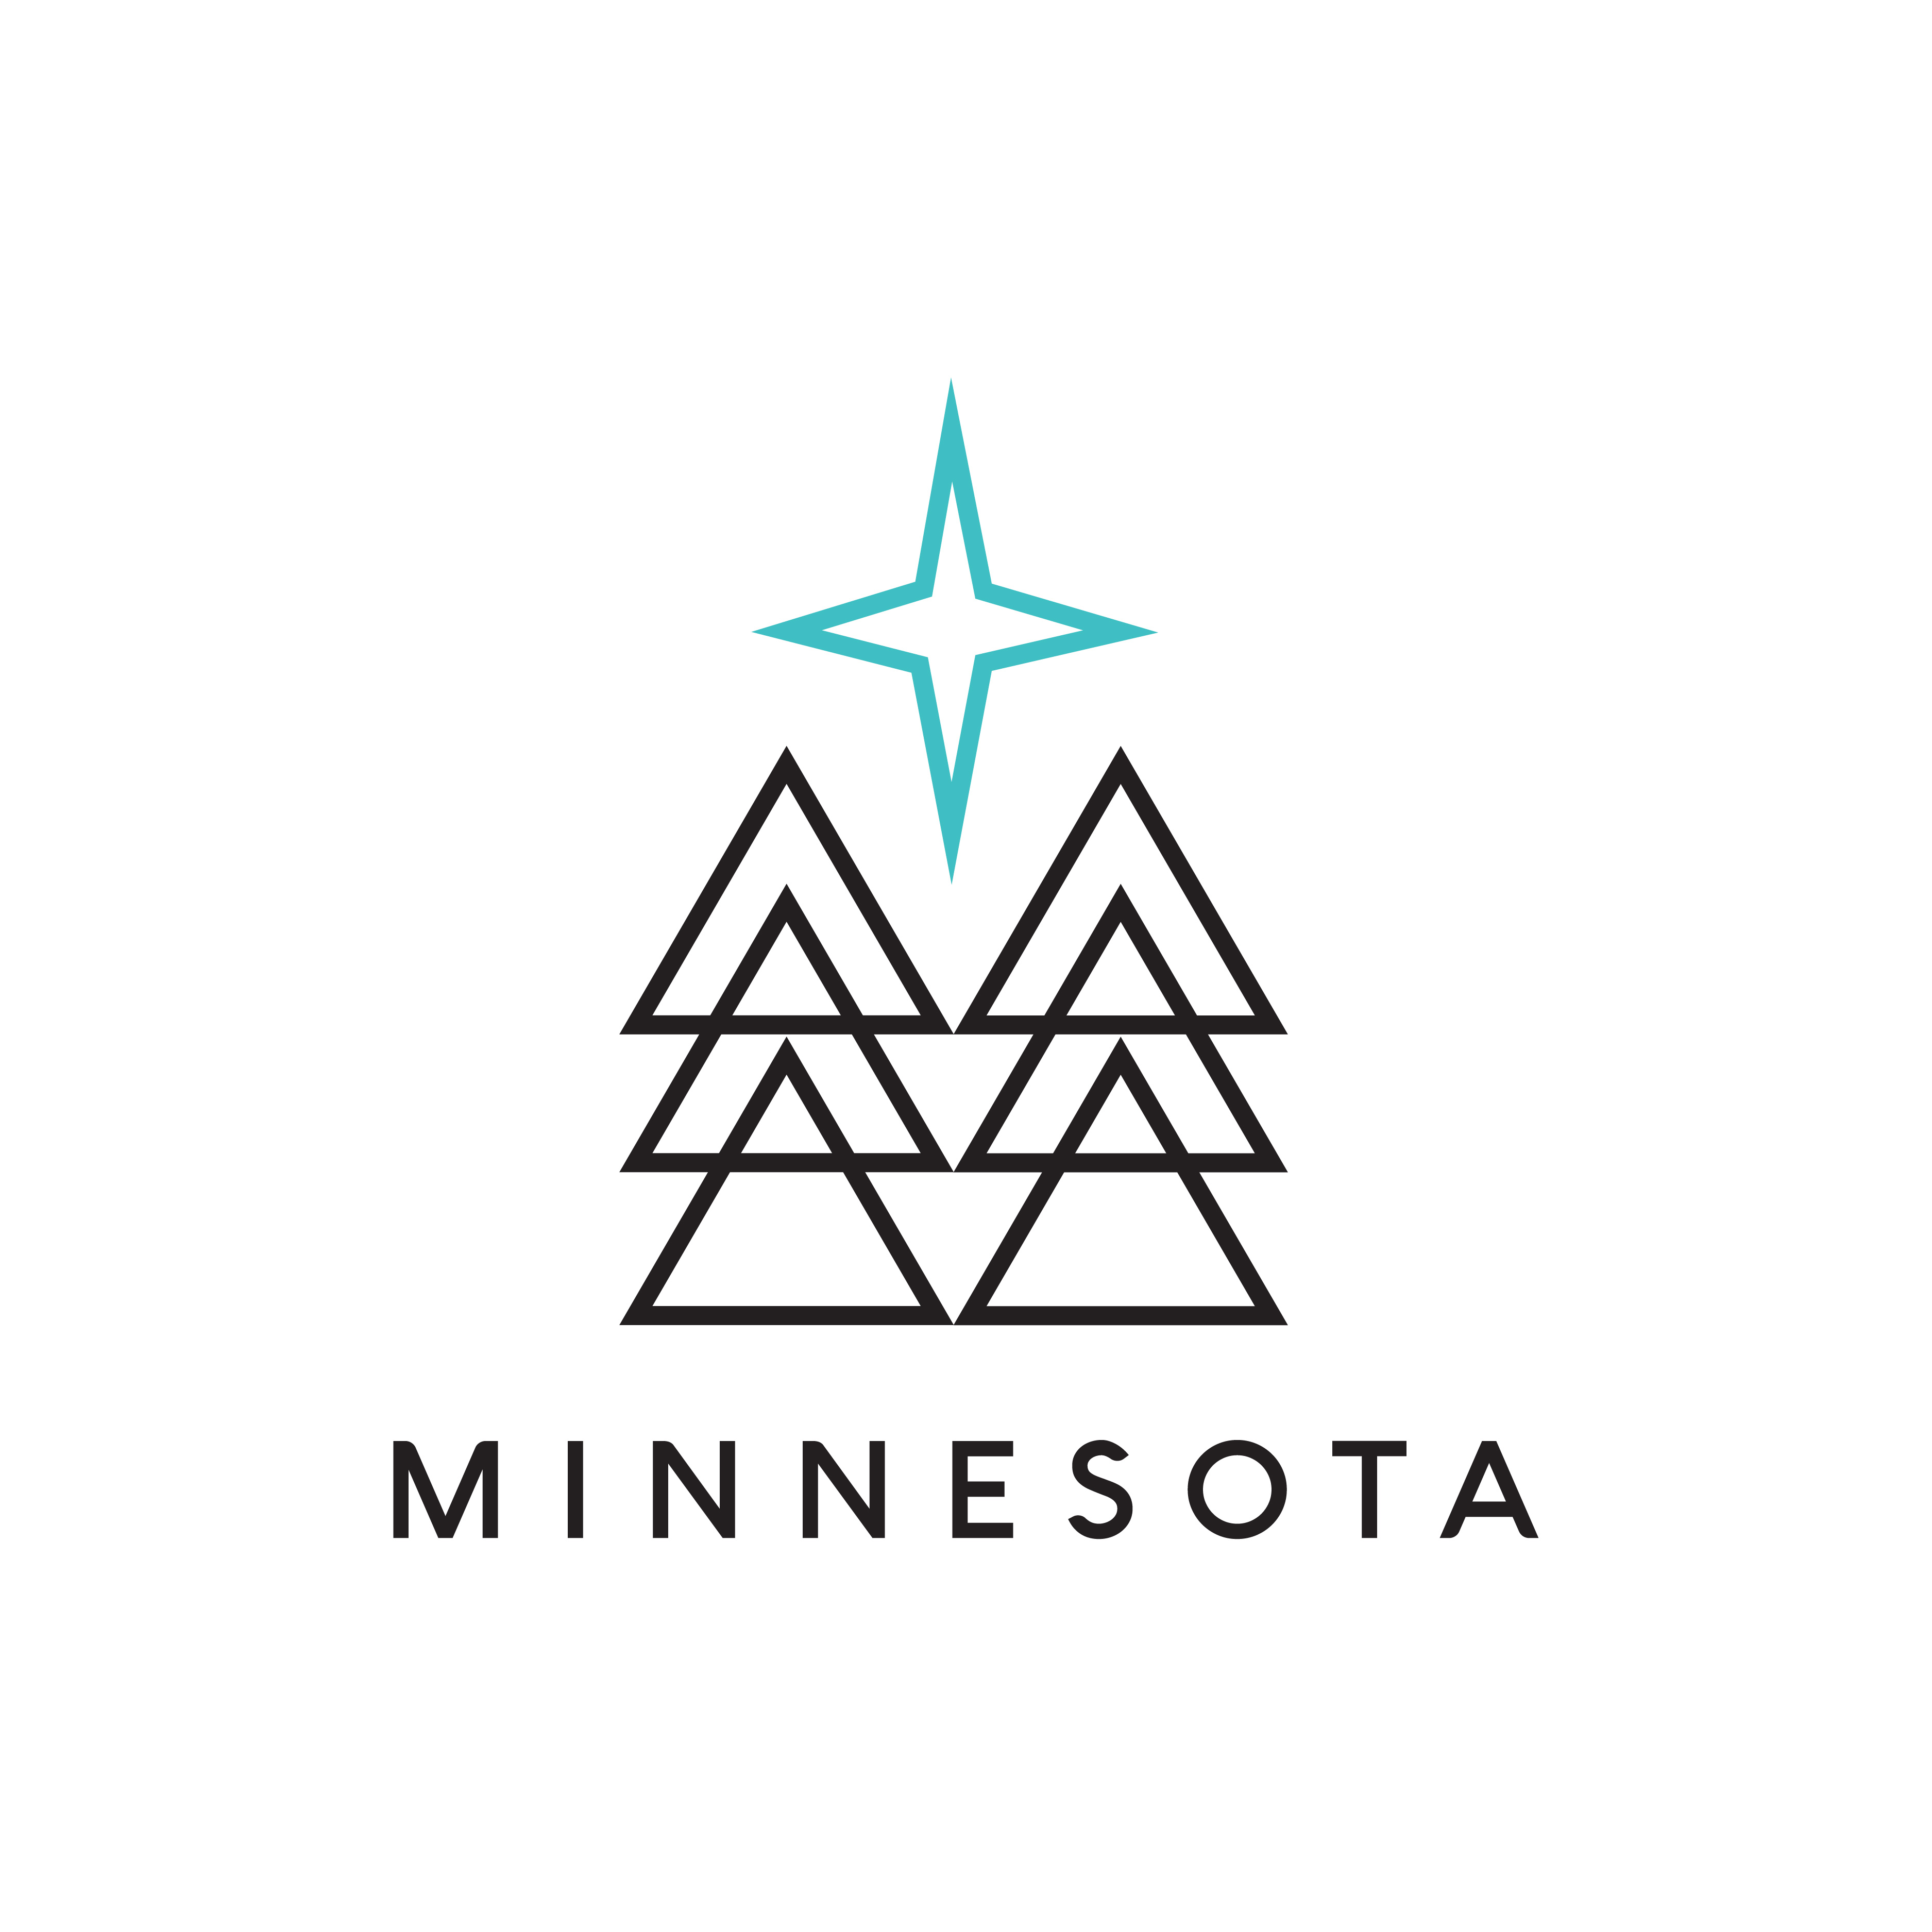 Minnesota logo design by logo designer Kenion Harvey Design for your inspiration and for the worlds largest logo competition